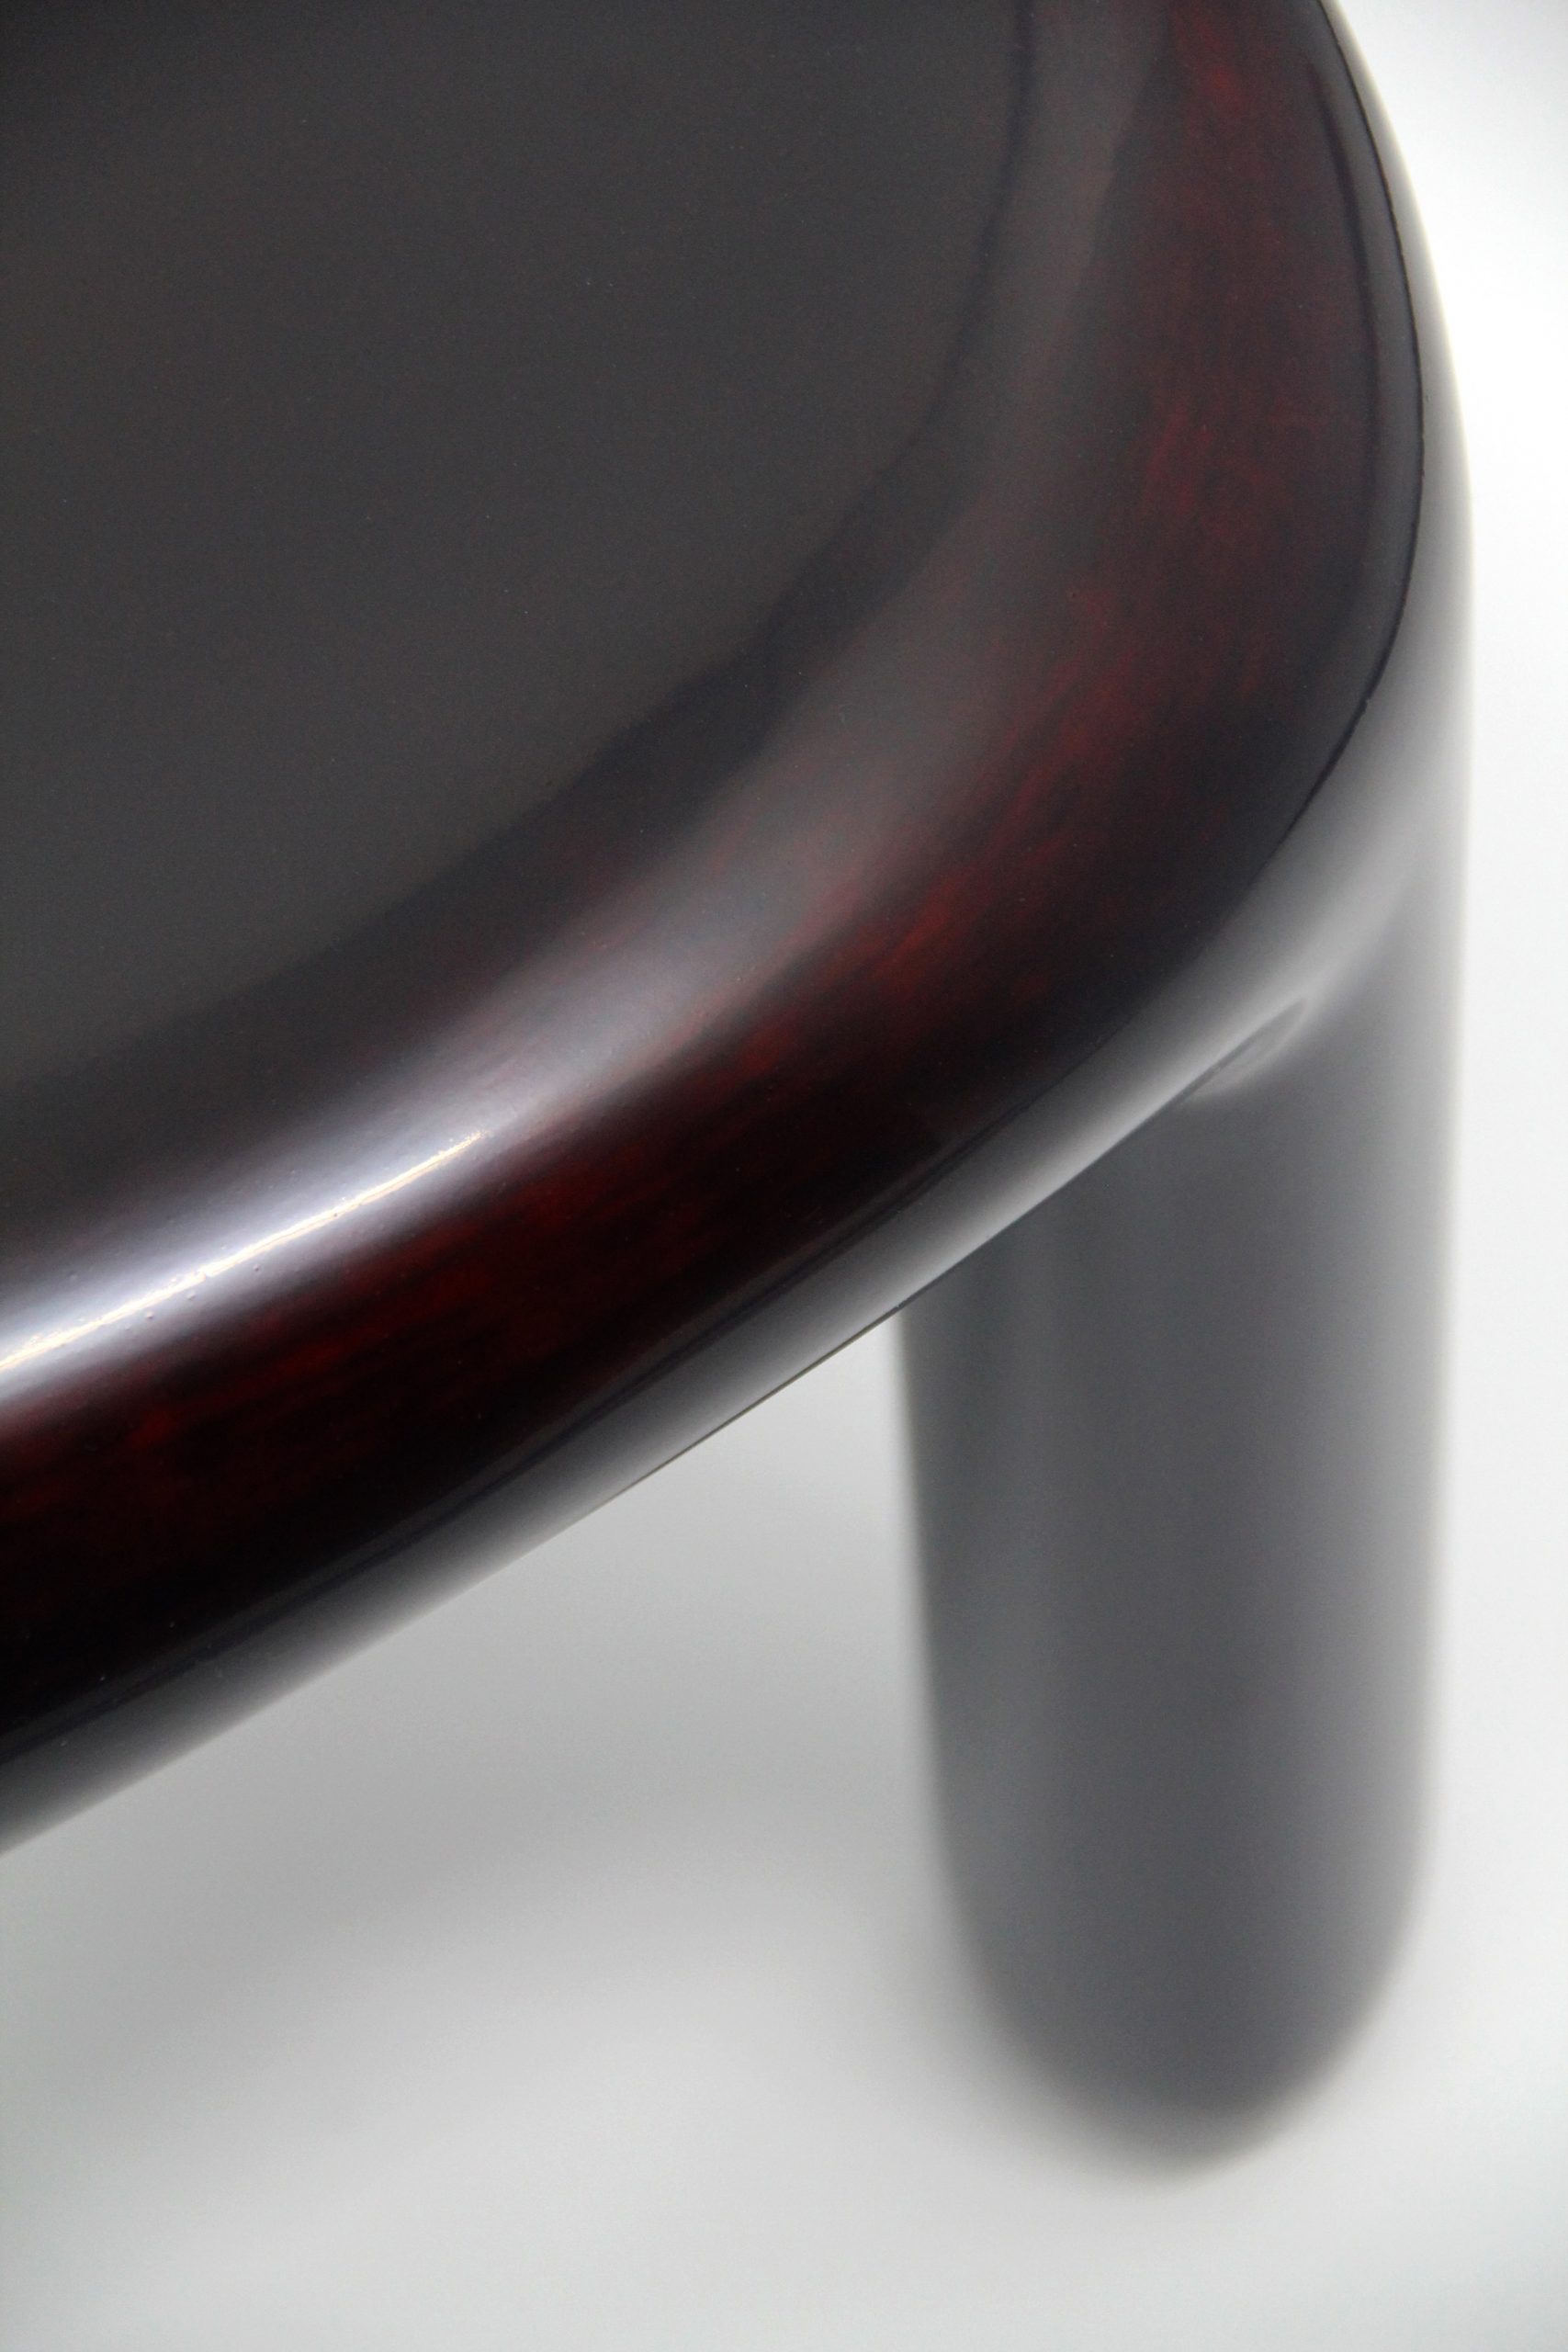 Ming Design Studio created its Bold stool series using wood coated in lacquer